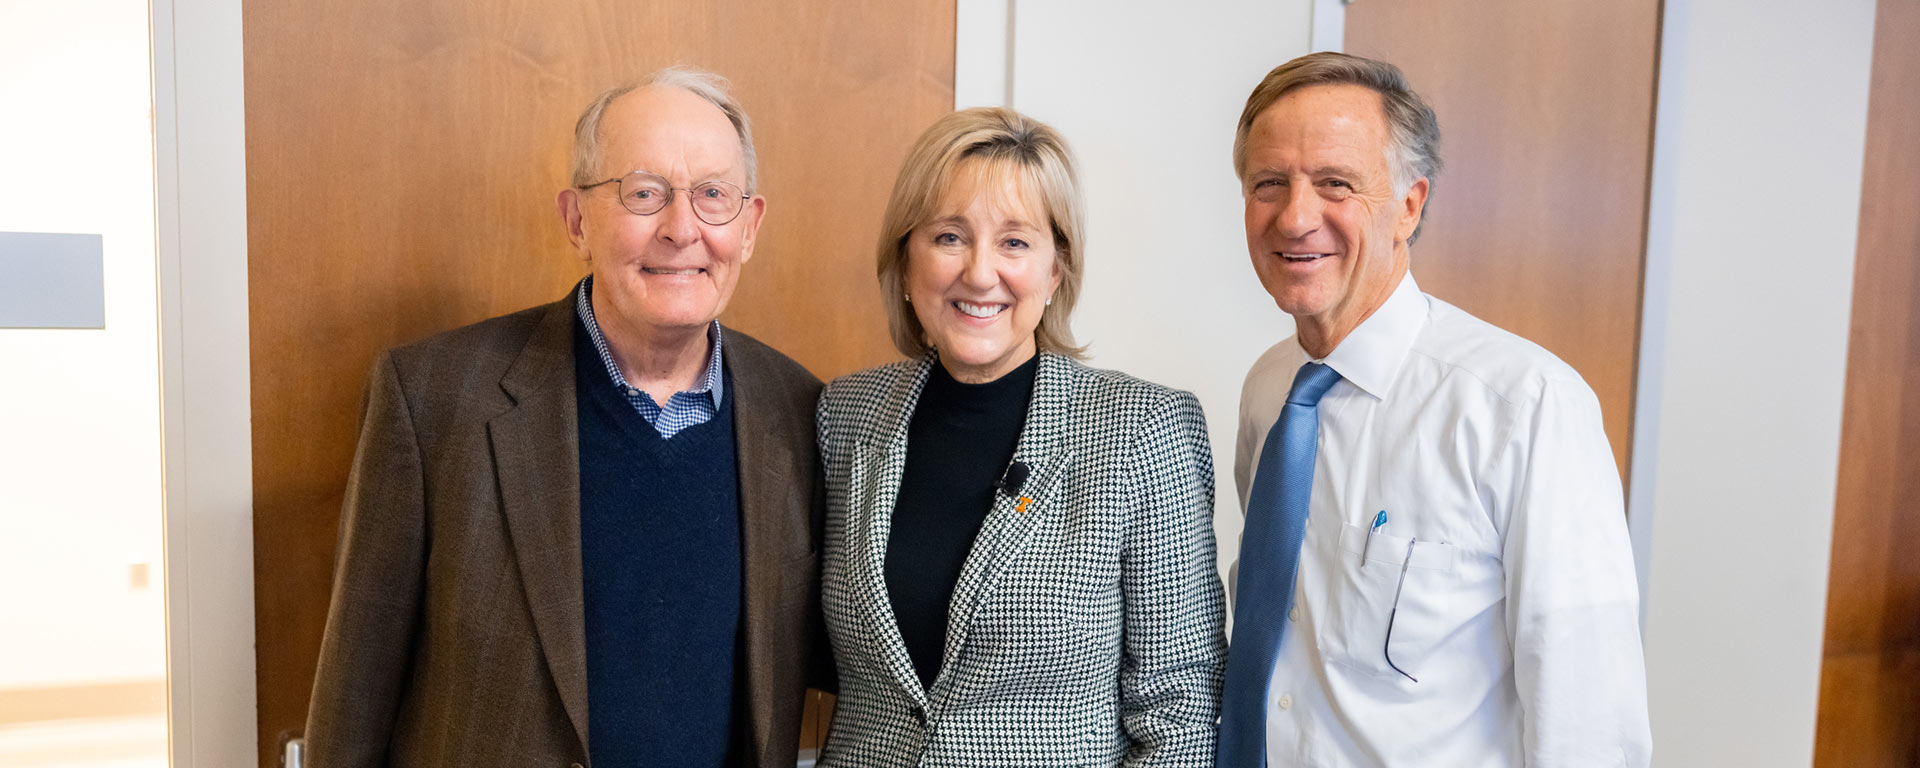 Former Sen. Lamar Alexander, left, joined UT Knoxville Chancellor Donde Plowman and former Tennessee Gov. Bill Haslam, who teamed up to teach an undergraduate honors course on leading with courage—the first course to be offered through the university’s new Institute of American Civics.